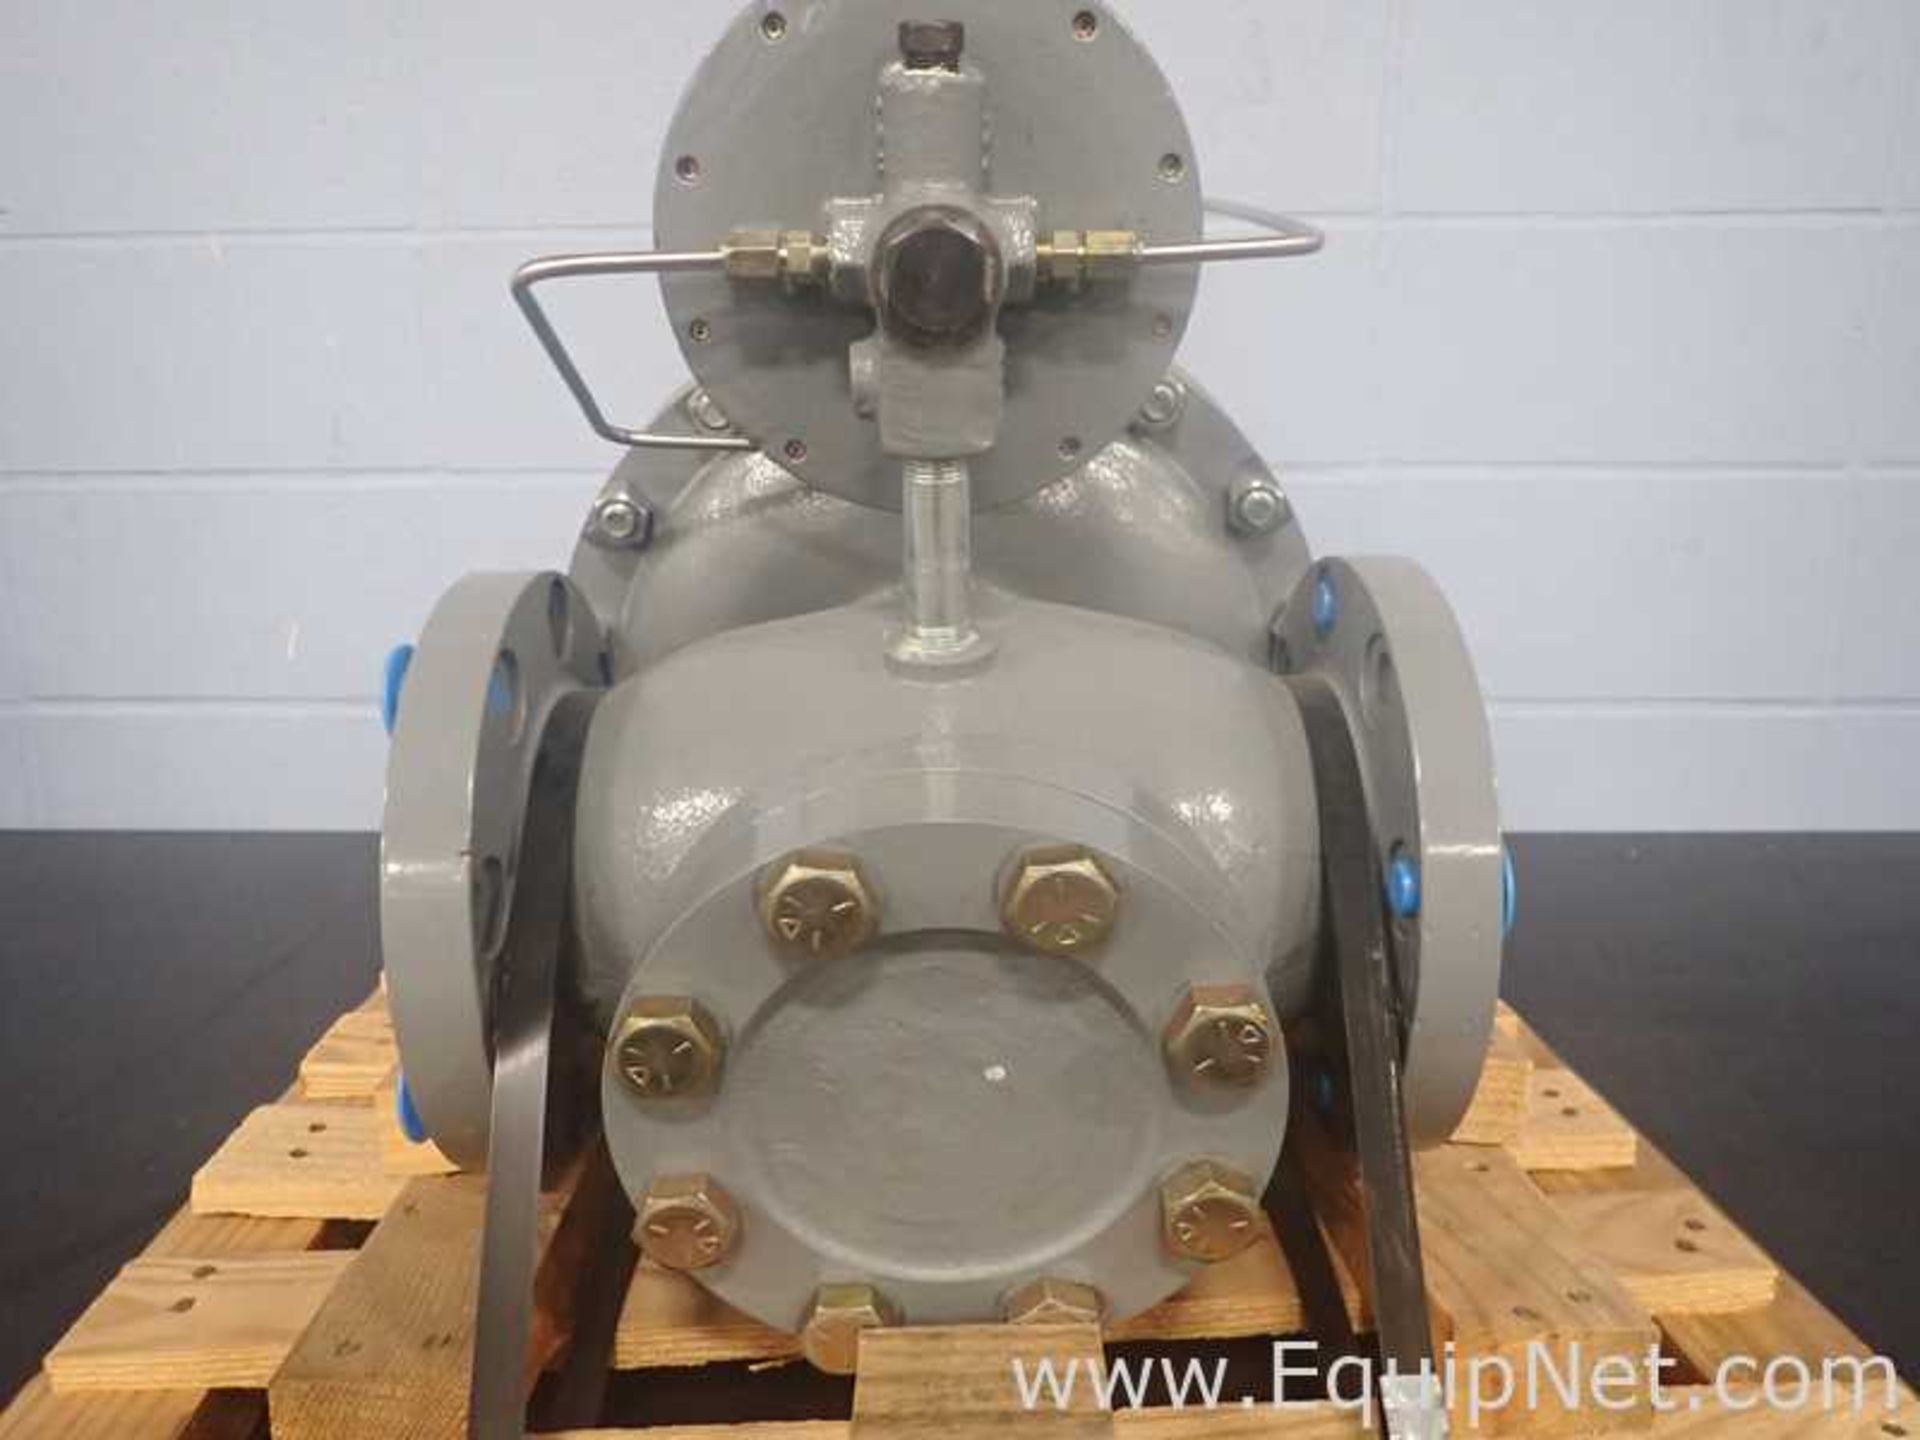 EQUIPNET LISTING #826704; REMOVAL COST: $20; MODEL: 92B; DESCRIPTION: Unused Fisher Controls 92B - Image 3 of 9